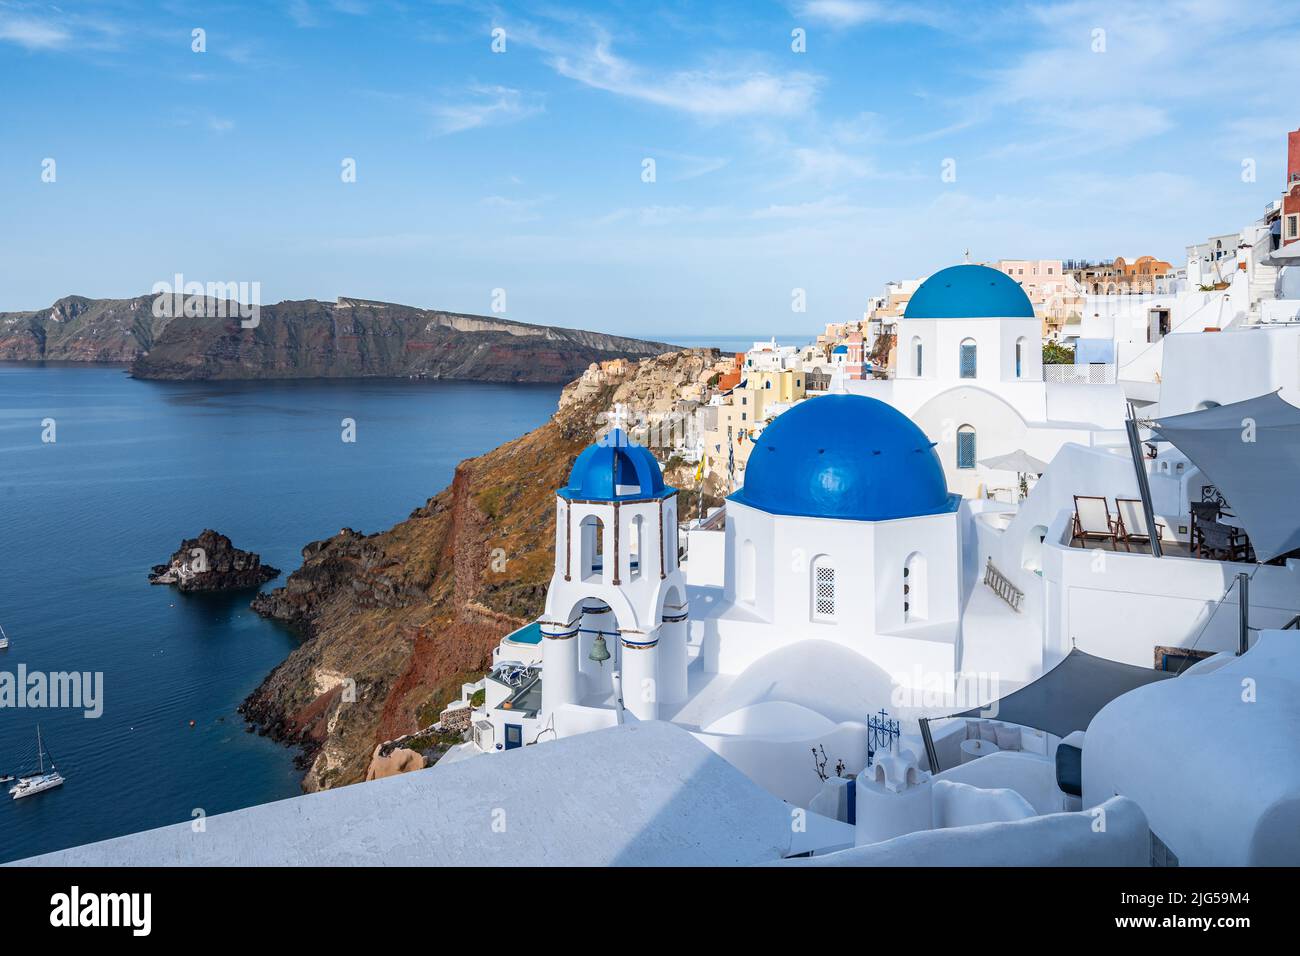 View of Oia in Santorini, the most famous village of the island with the typical white houses and blue domed churches Stock Photo